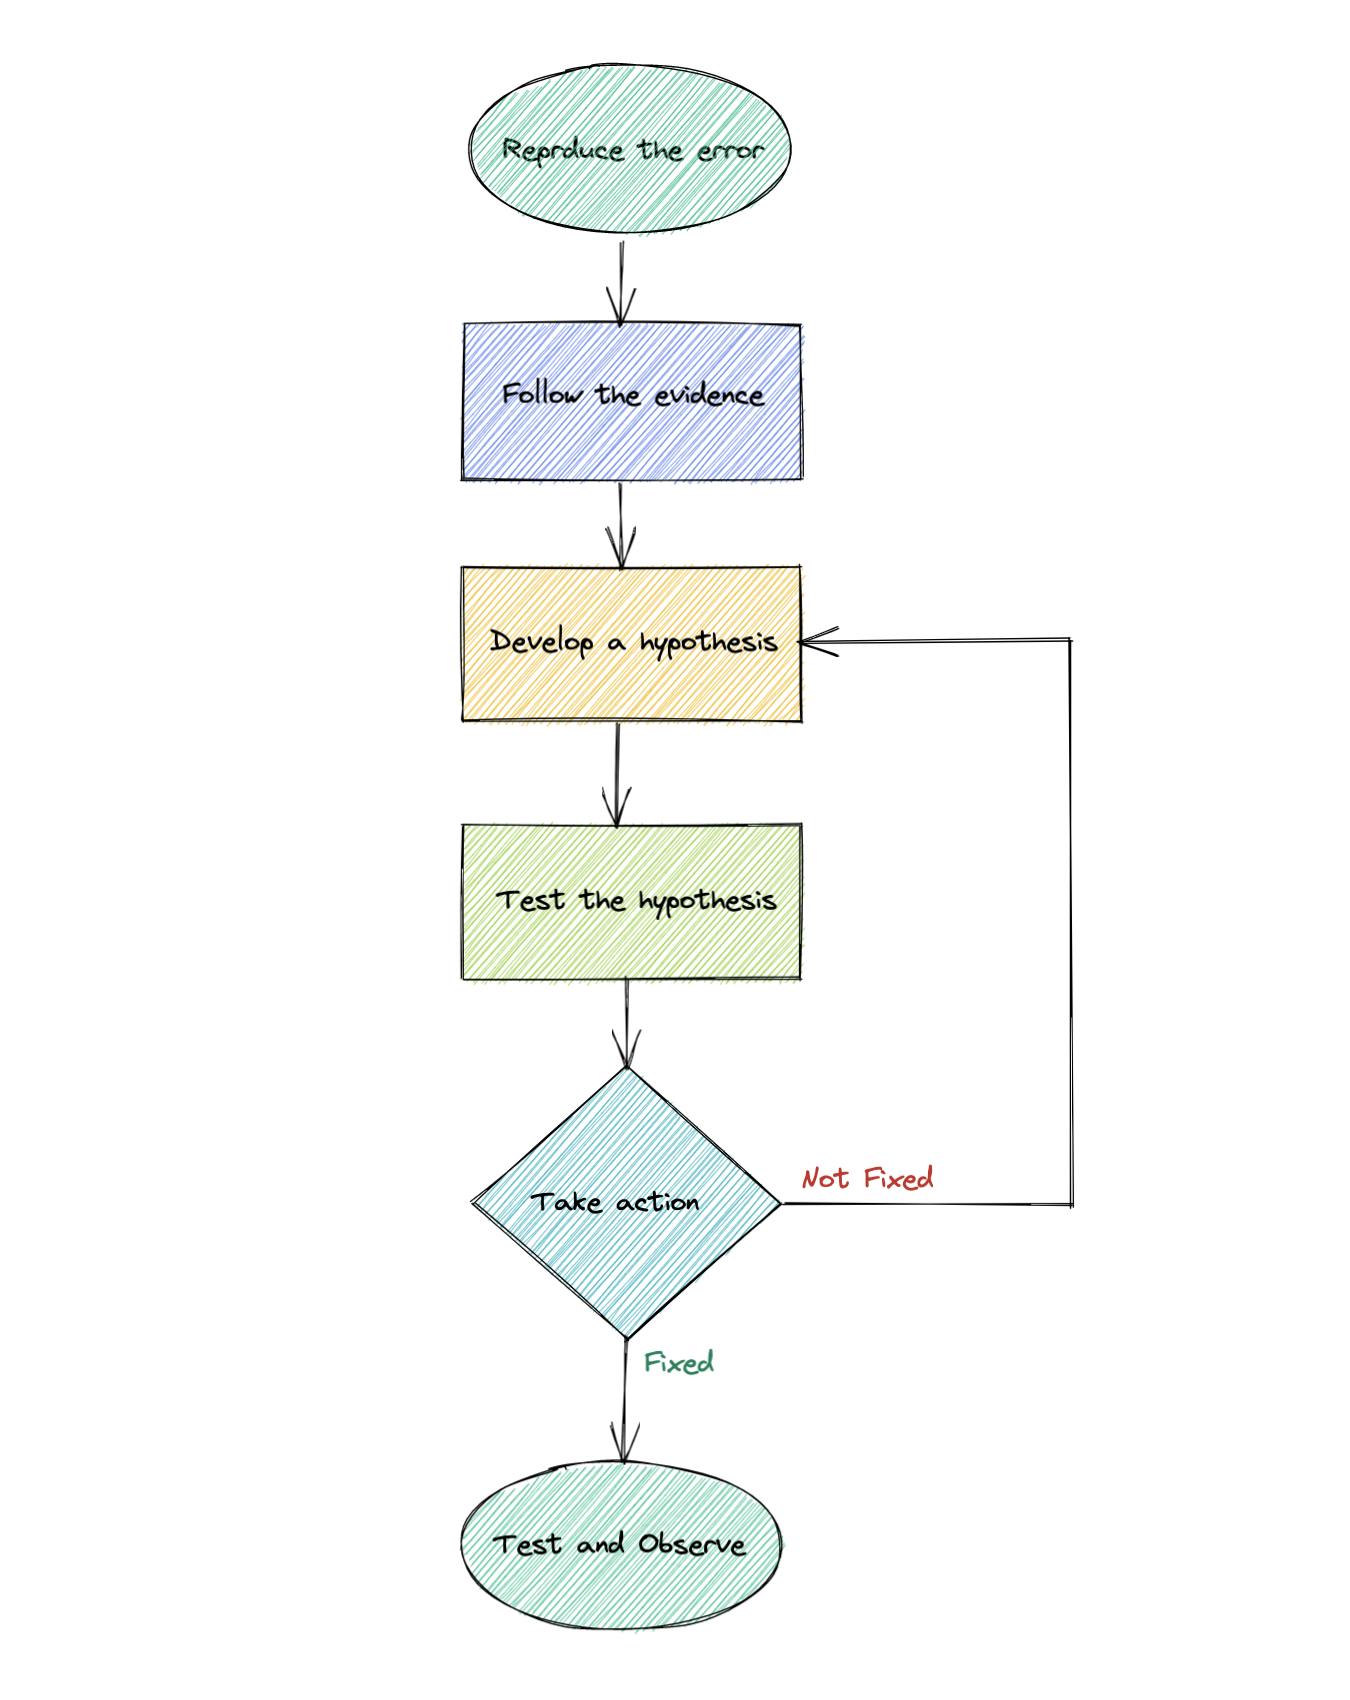 A flowchart showing systematic debugging methodology